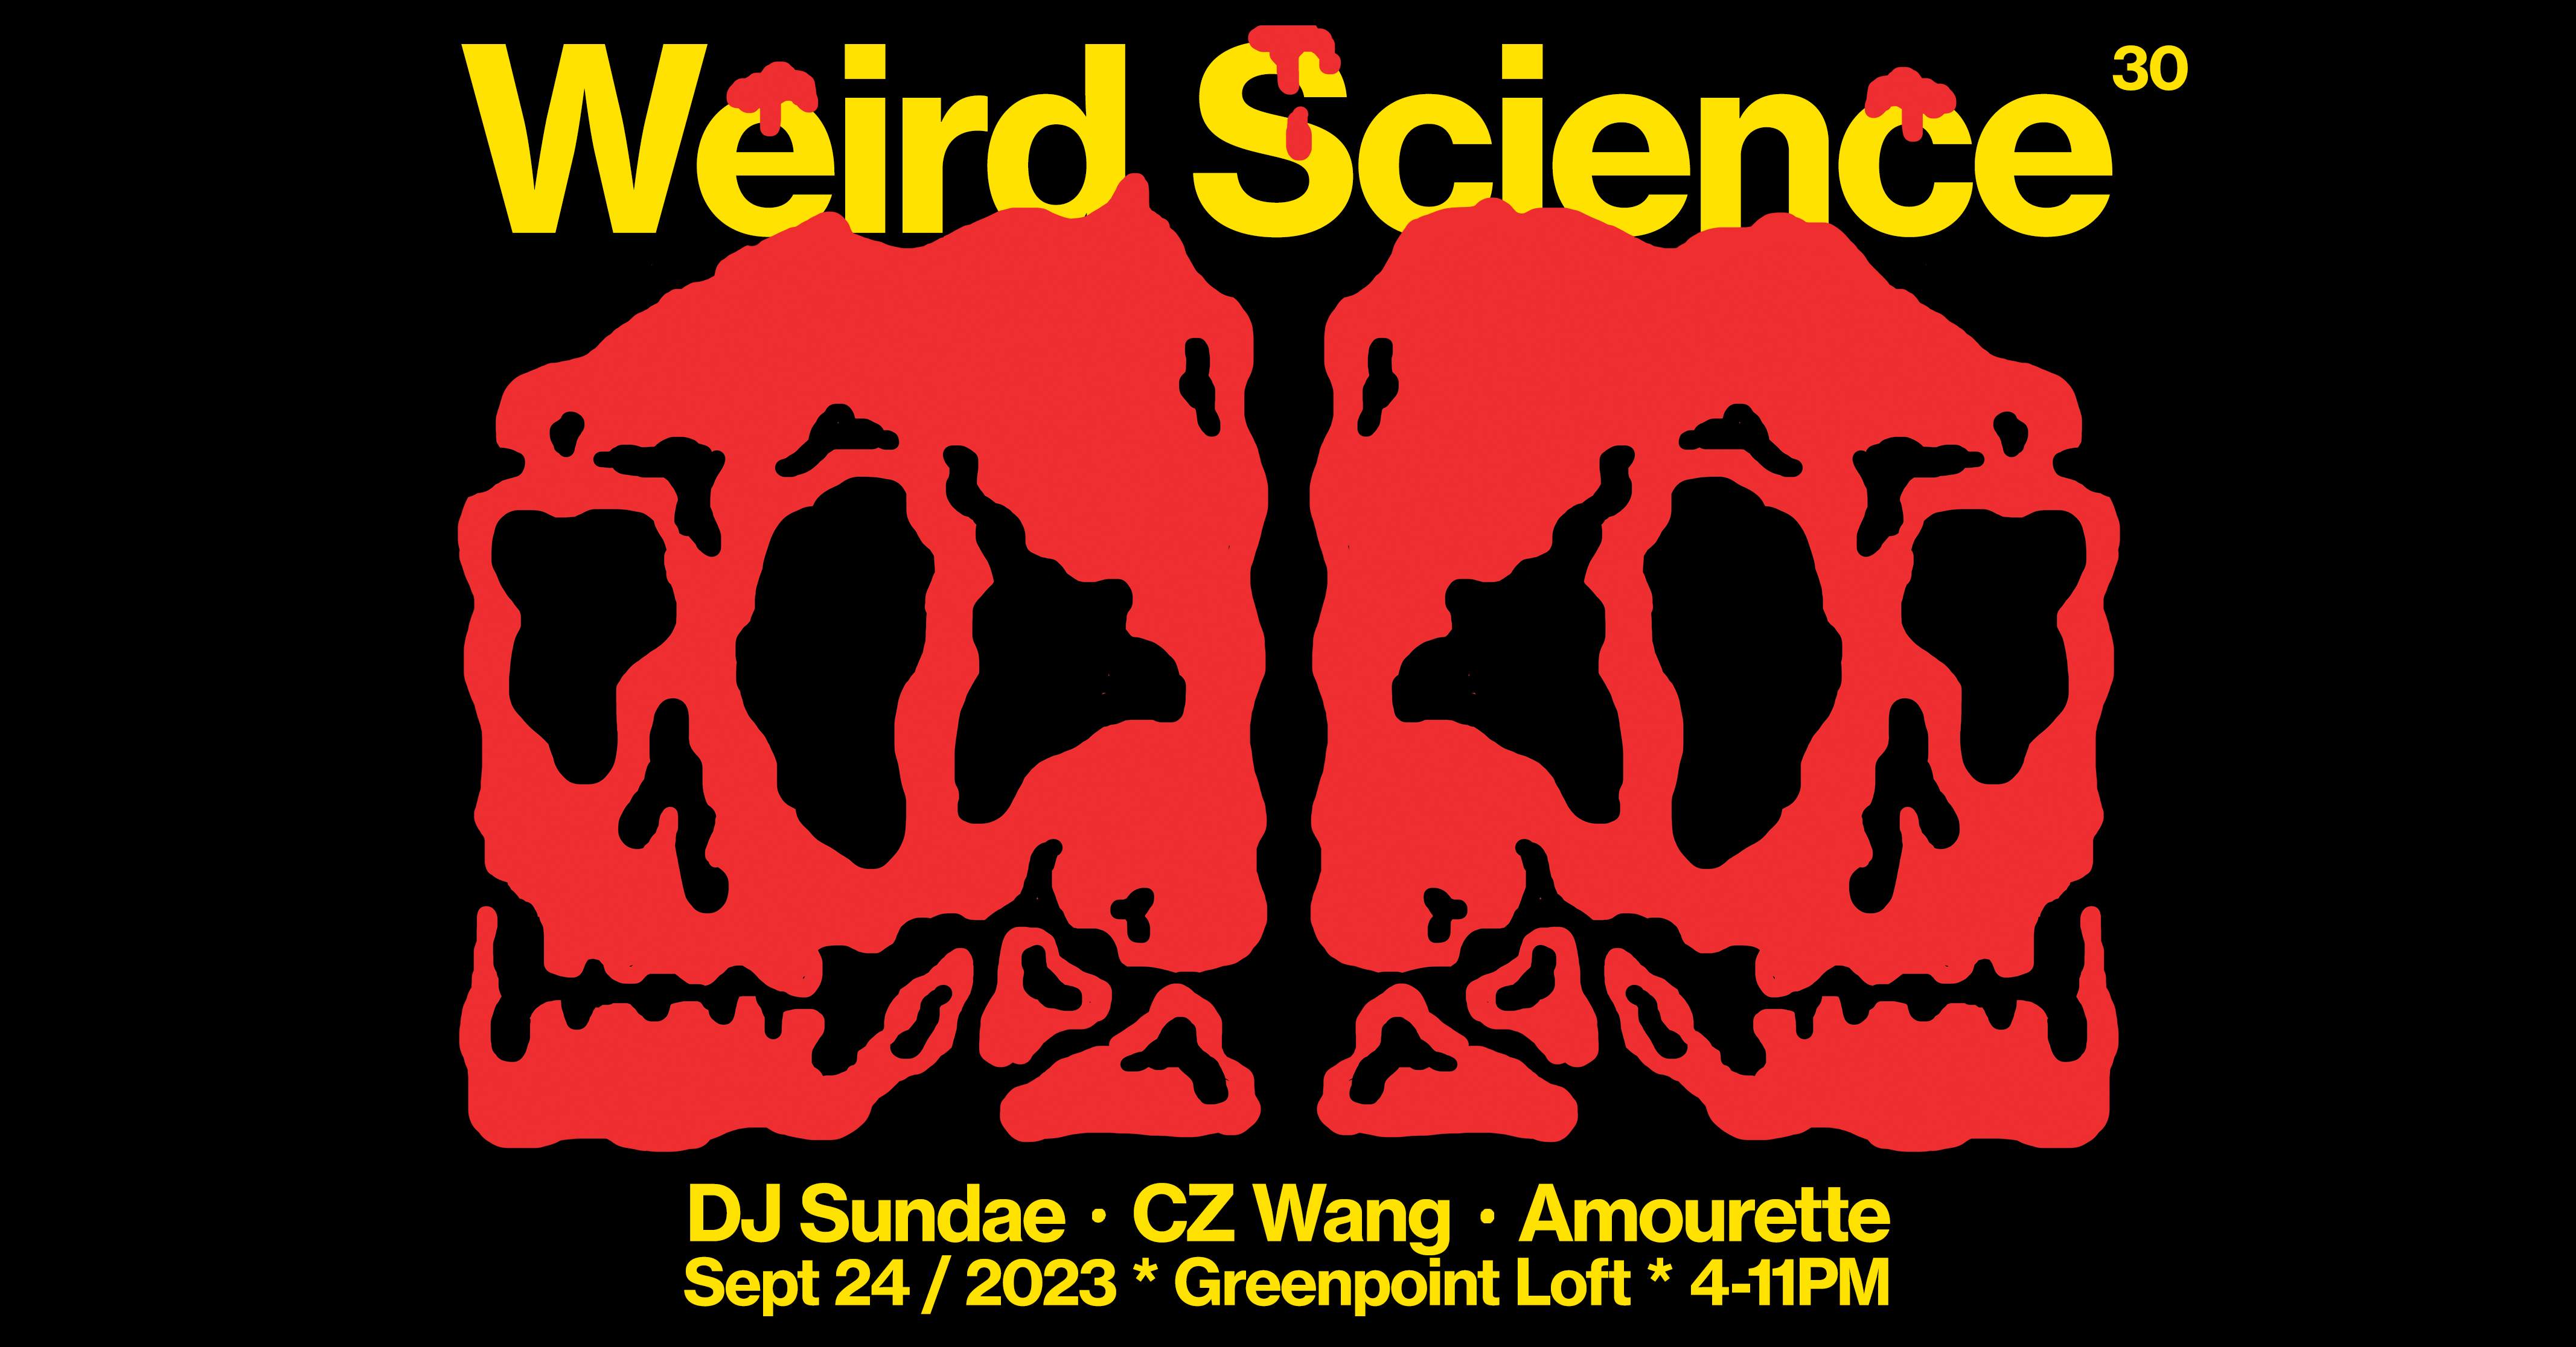 Weird Science with DJ Sundae and CZ Wang - フライヤー表